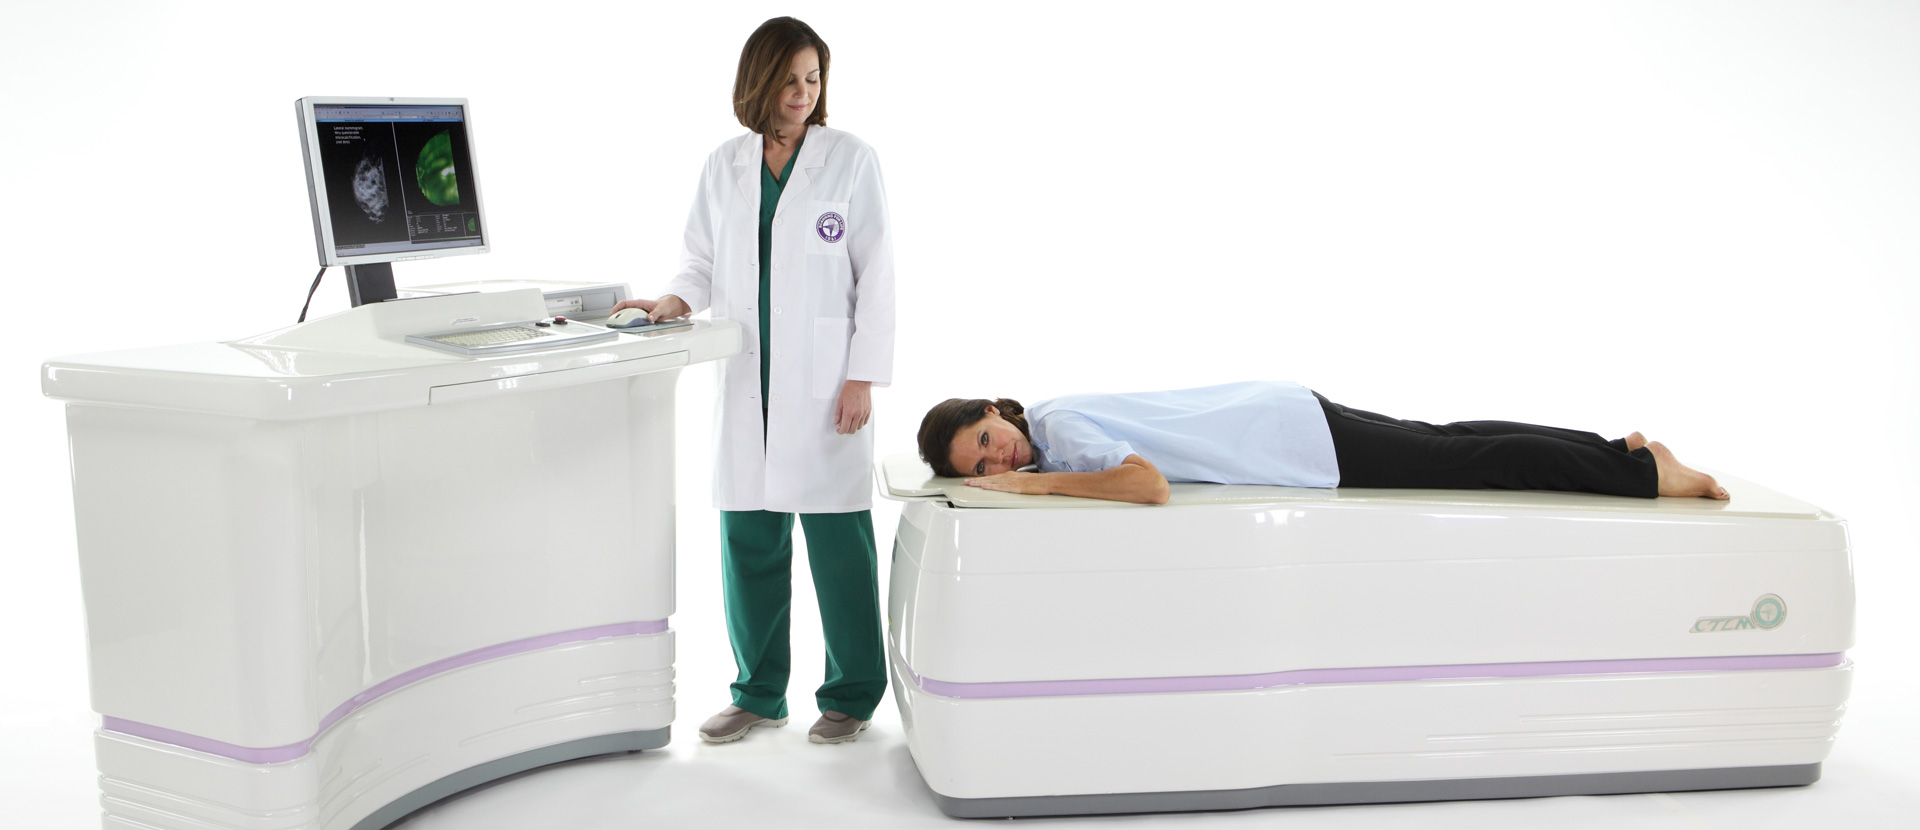 CTLM® – Laser Breast Imaging Without Compression